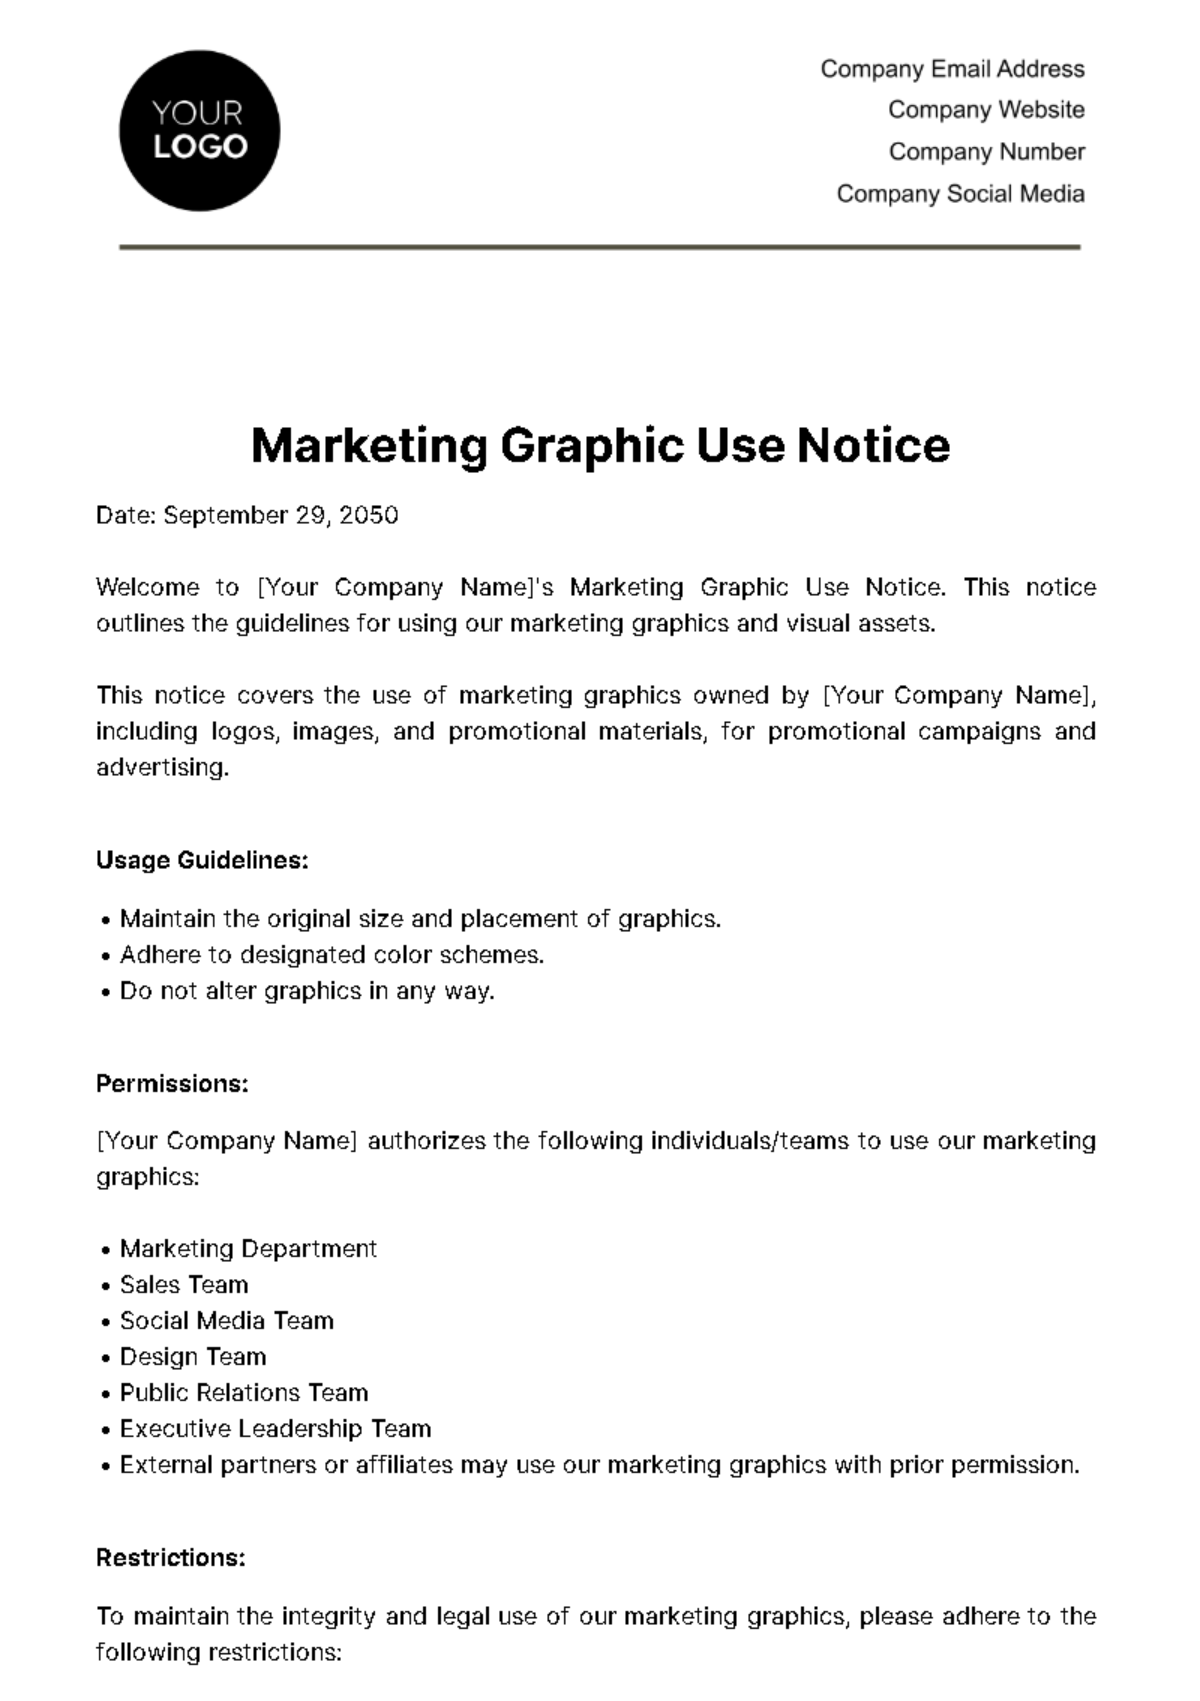 Free Marketing Graphic Use Notice Template